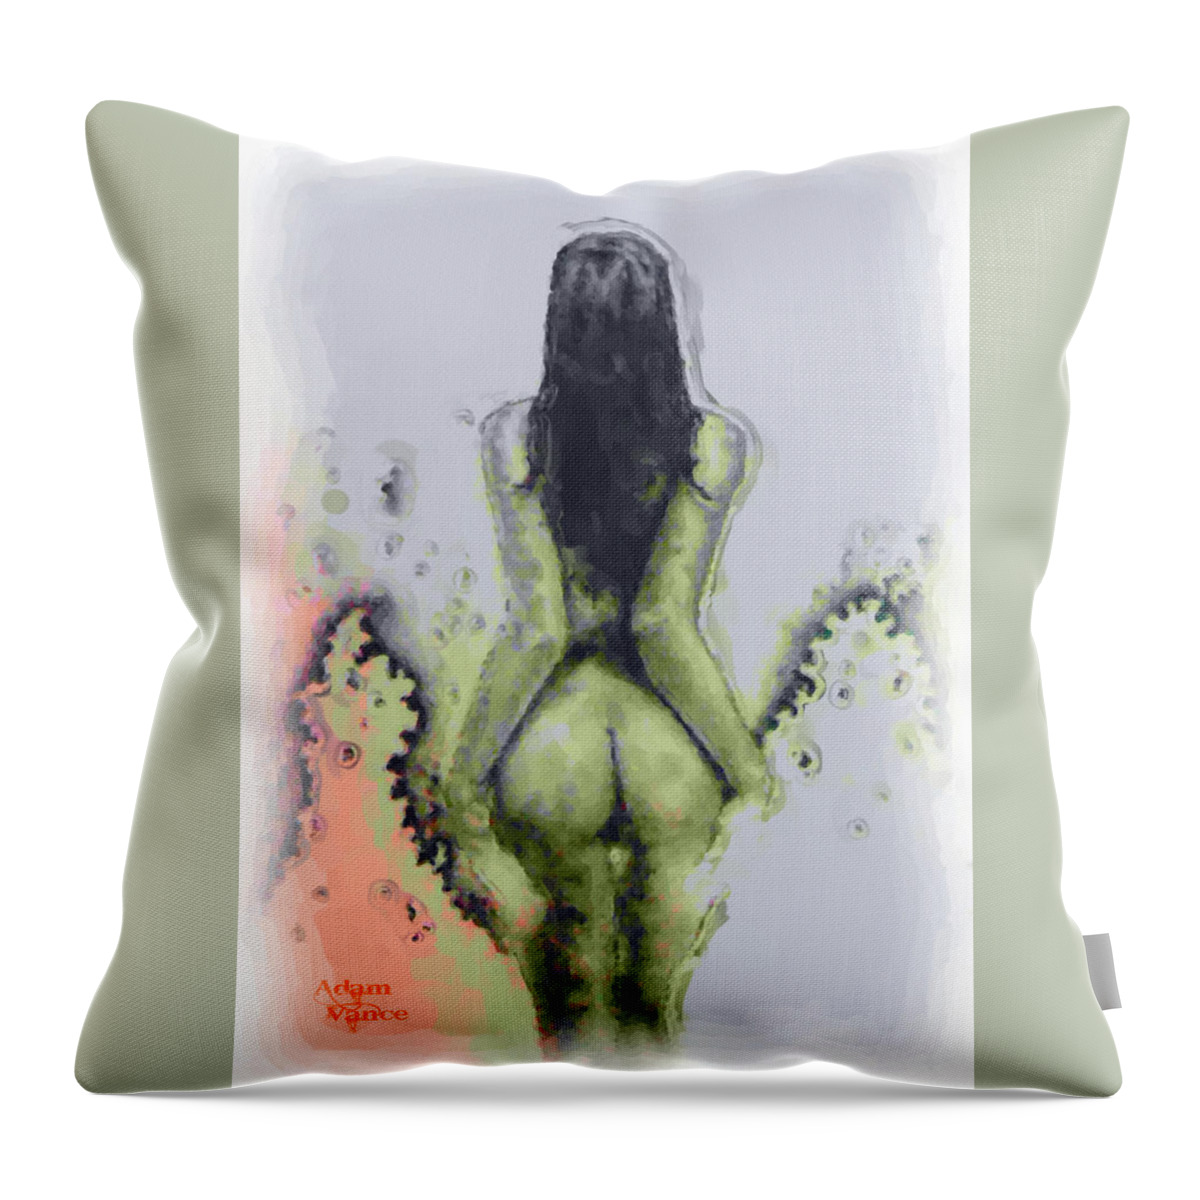 Woman Throw Pillow featuring the painting Divine by Adam Vance